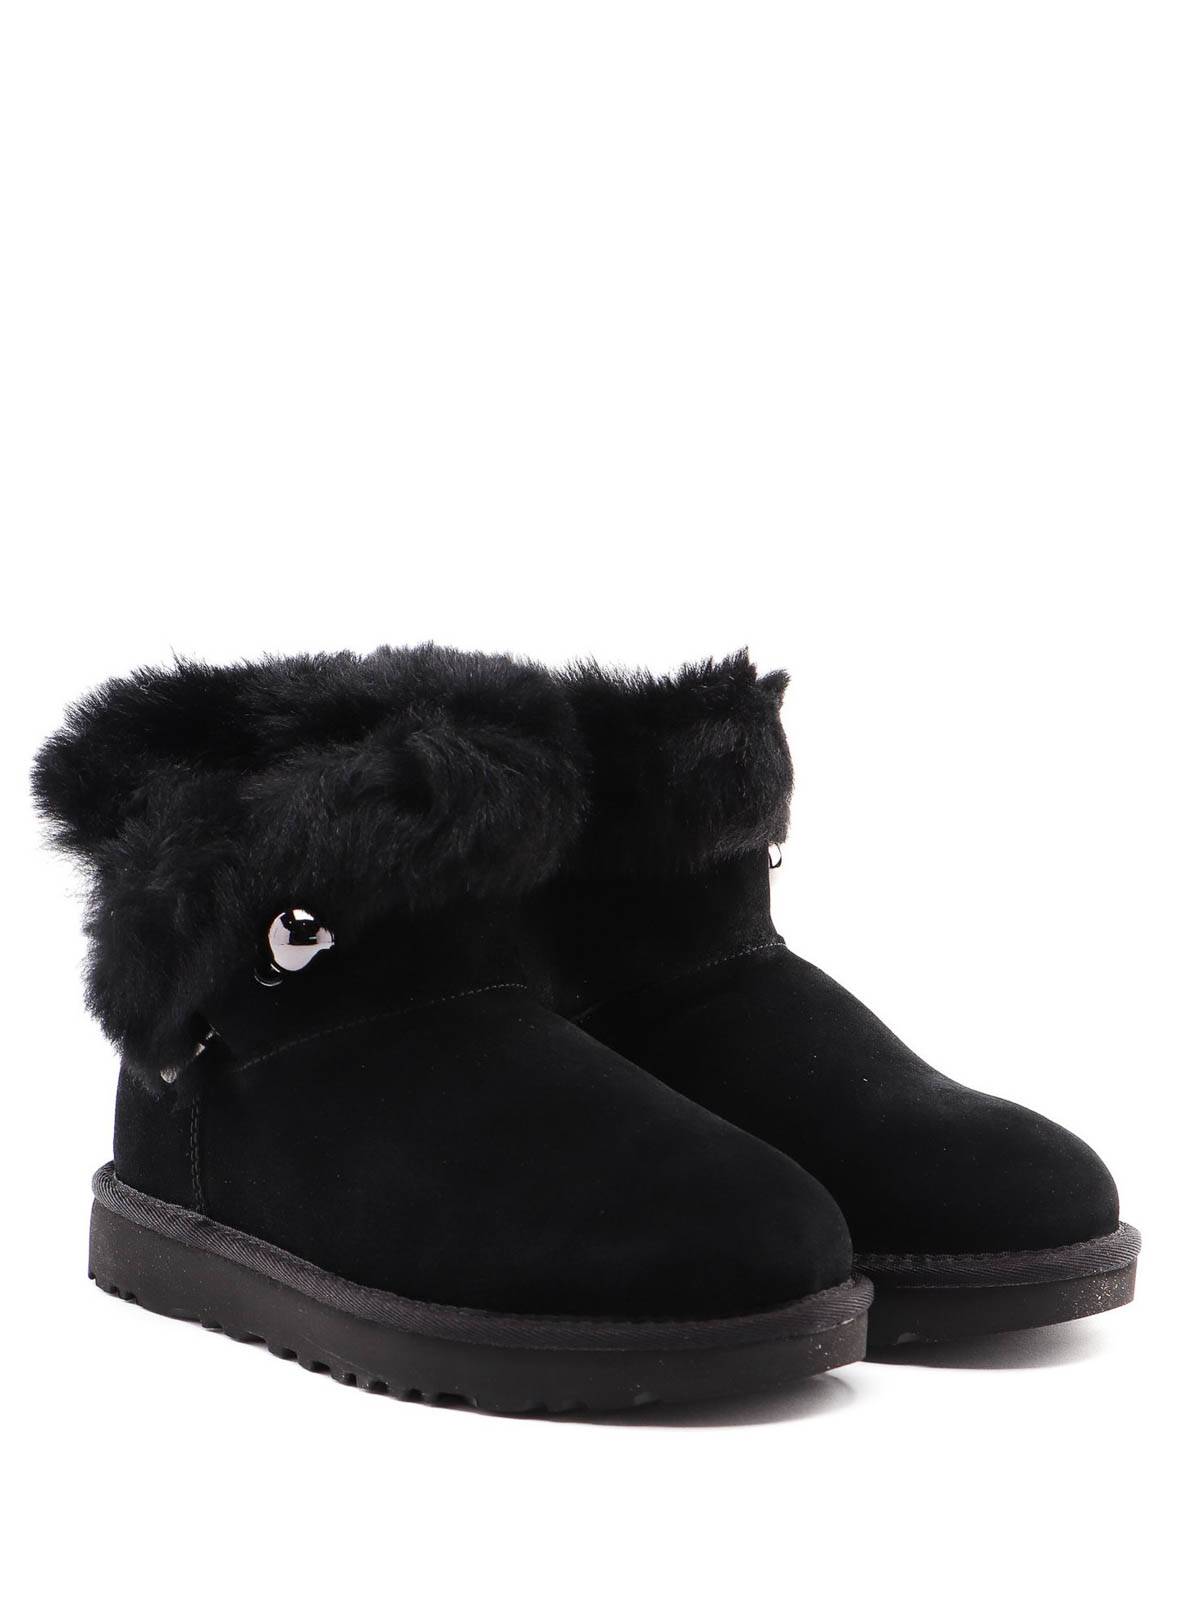 Ugg Black Classic Fluff Pin Mini ankle boots ankle